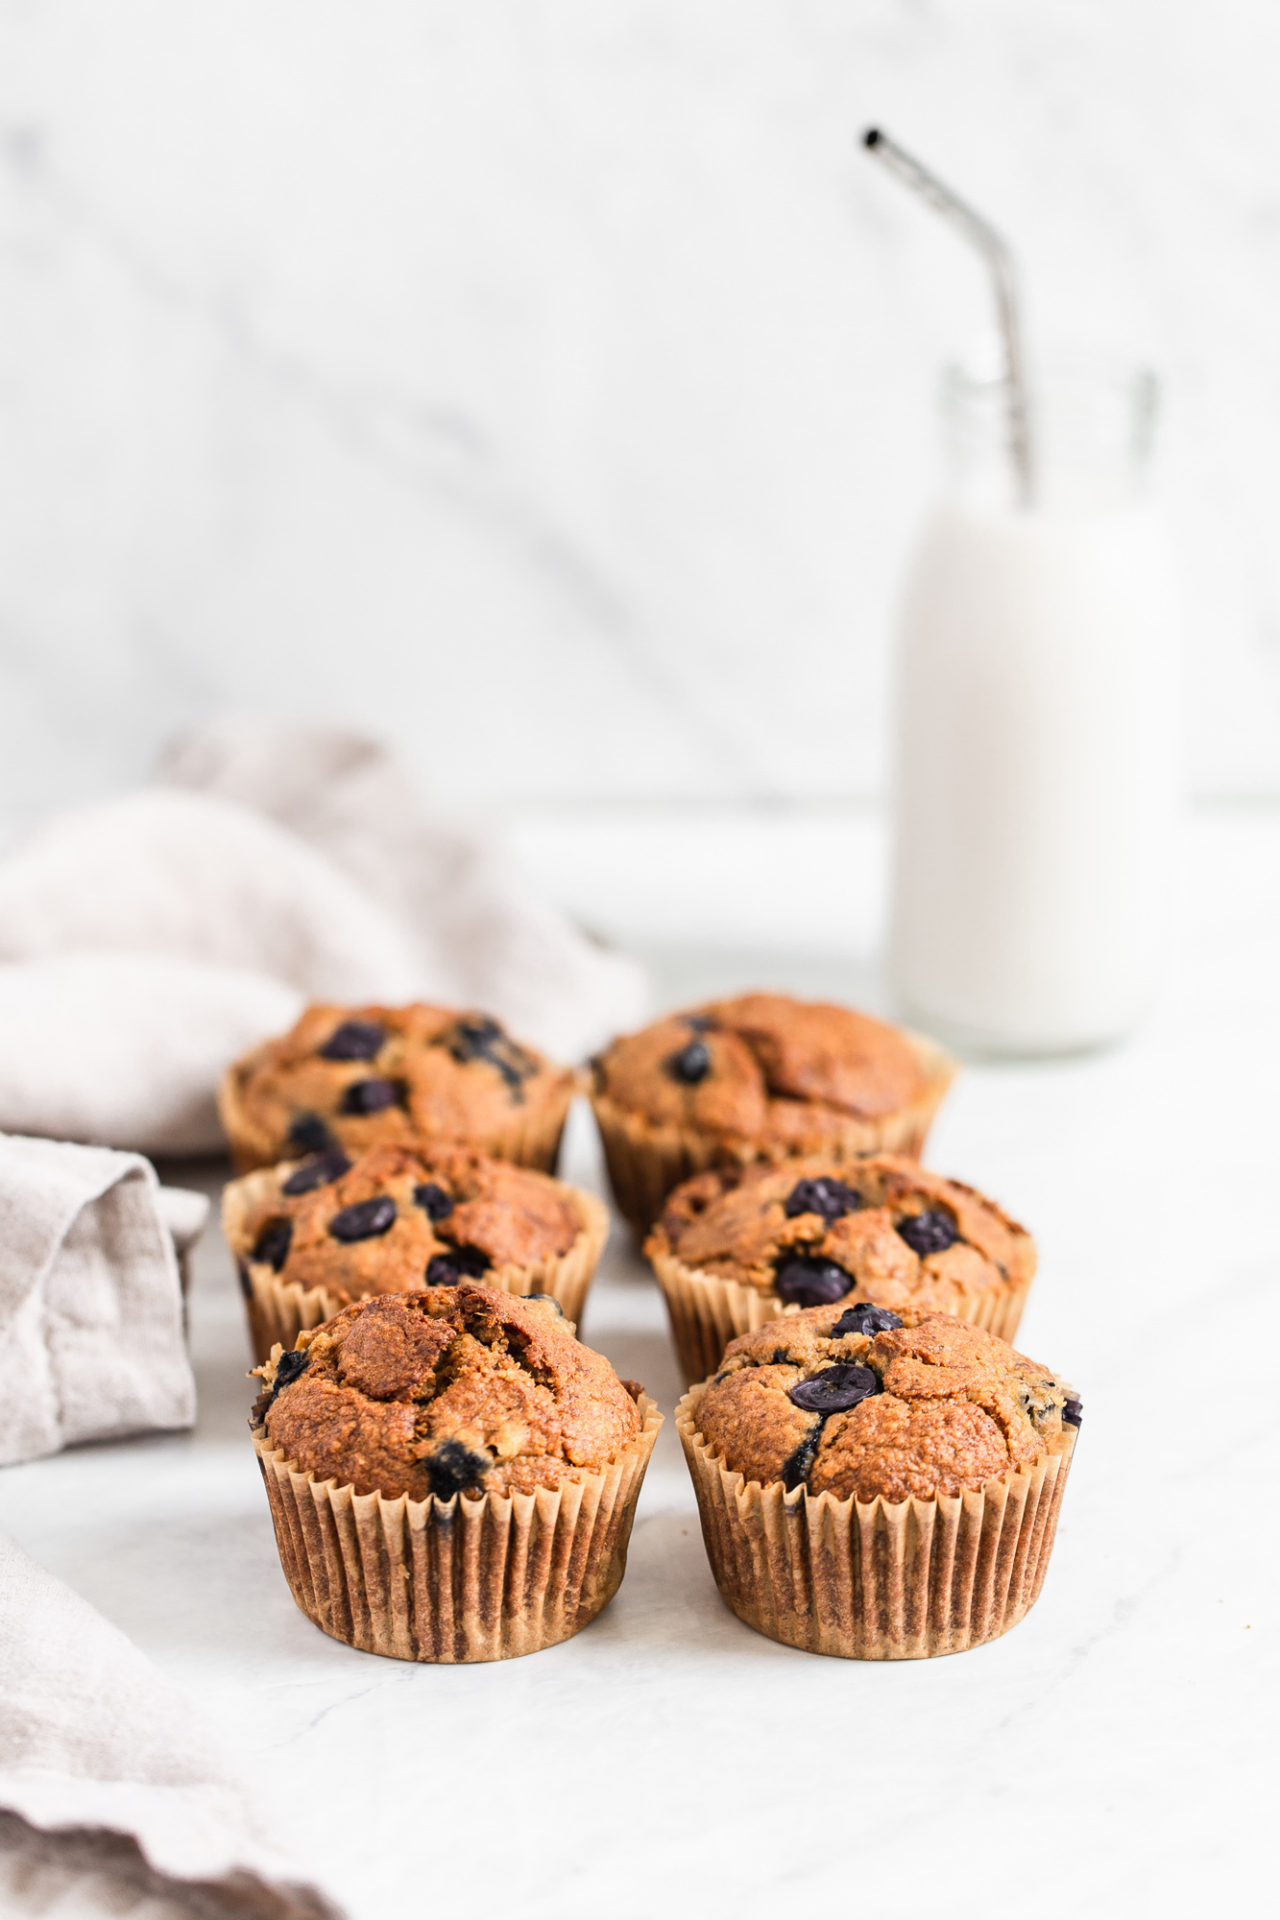 Best Healthy Oatmeal Banana Blueberry Muffins